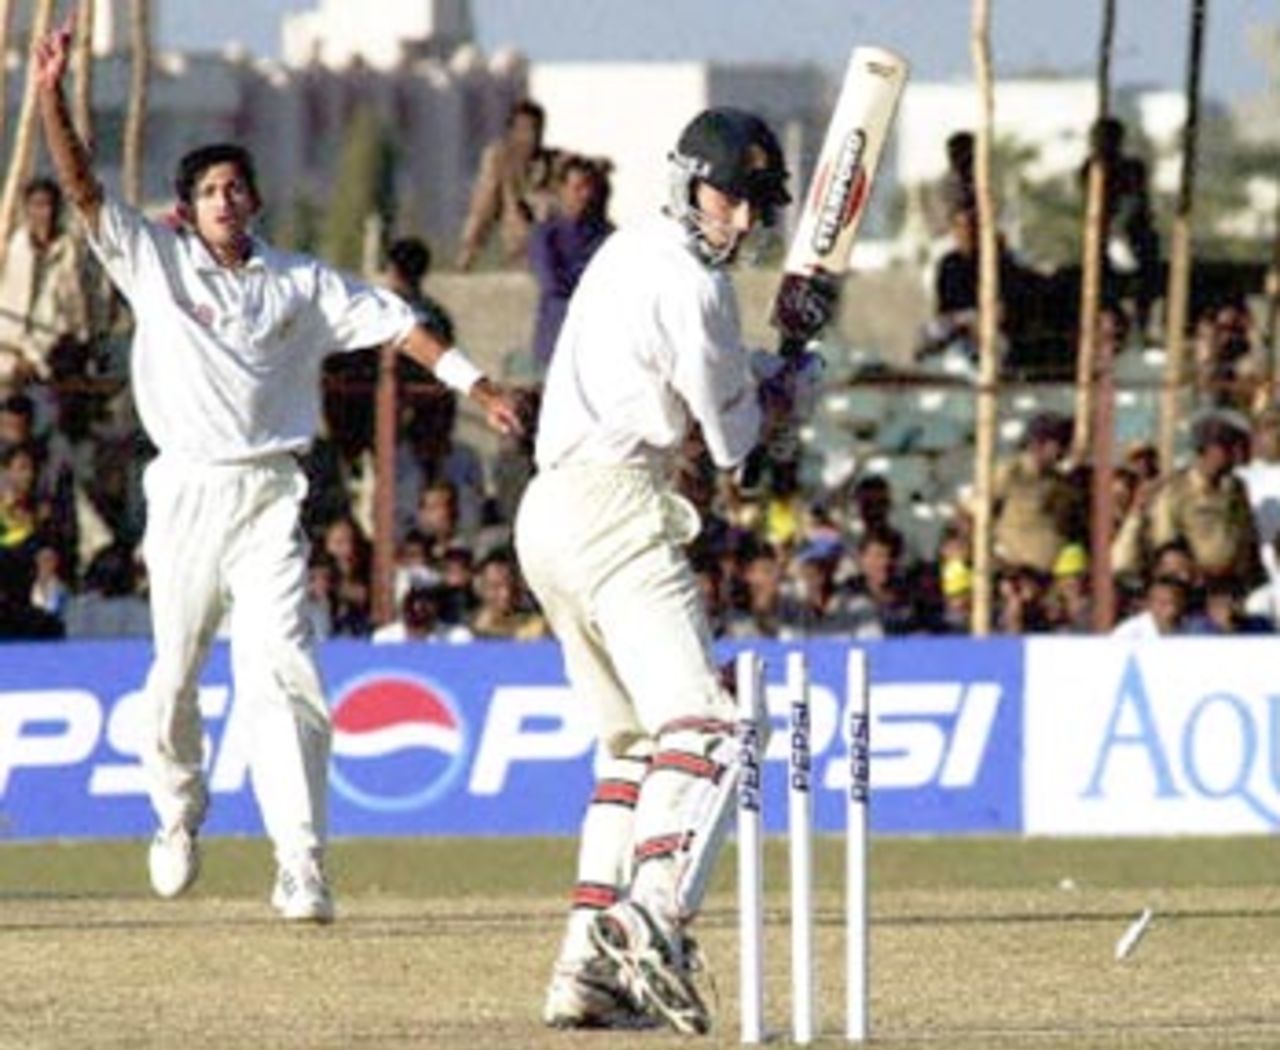 Indian bowler, Ajit Agarkar (L) jubilates after sending the bails flying off Zimbabwe batsman Brian Murphy's (R) stumps in the final match of the one-day international, 14 December 2000 at the Municipal cricket ground in Rajkot. Agarkar was declared 'Man of the Match' for having scored 67 runs off 25 balls that helped India win the match and the series.